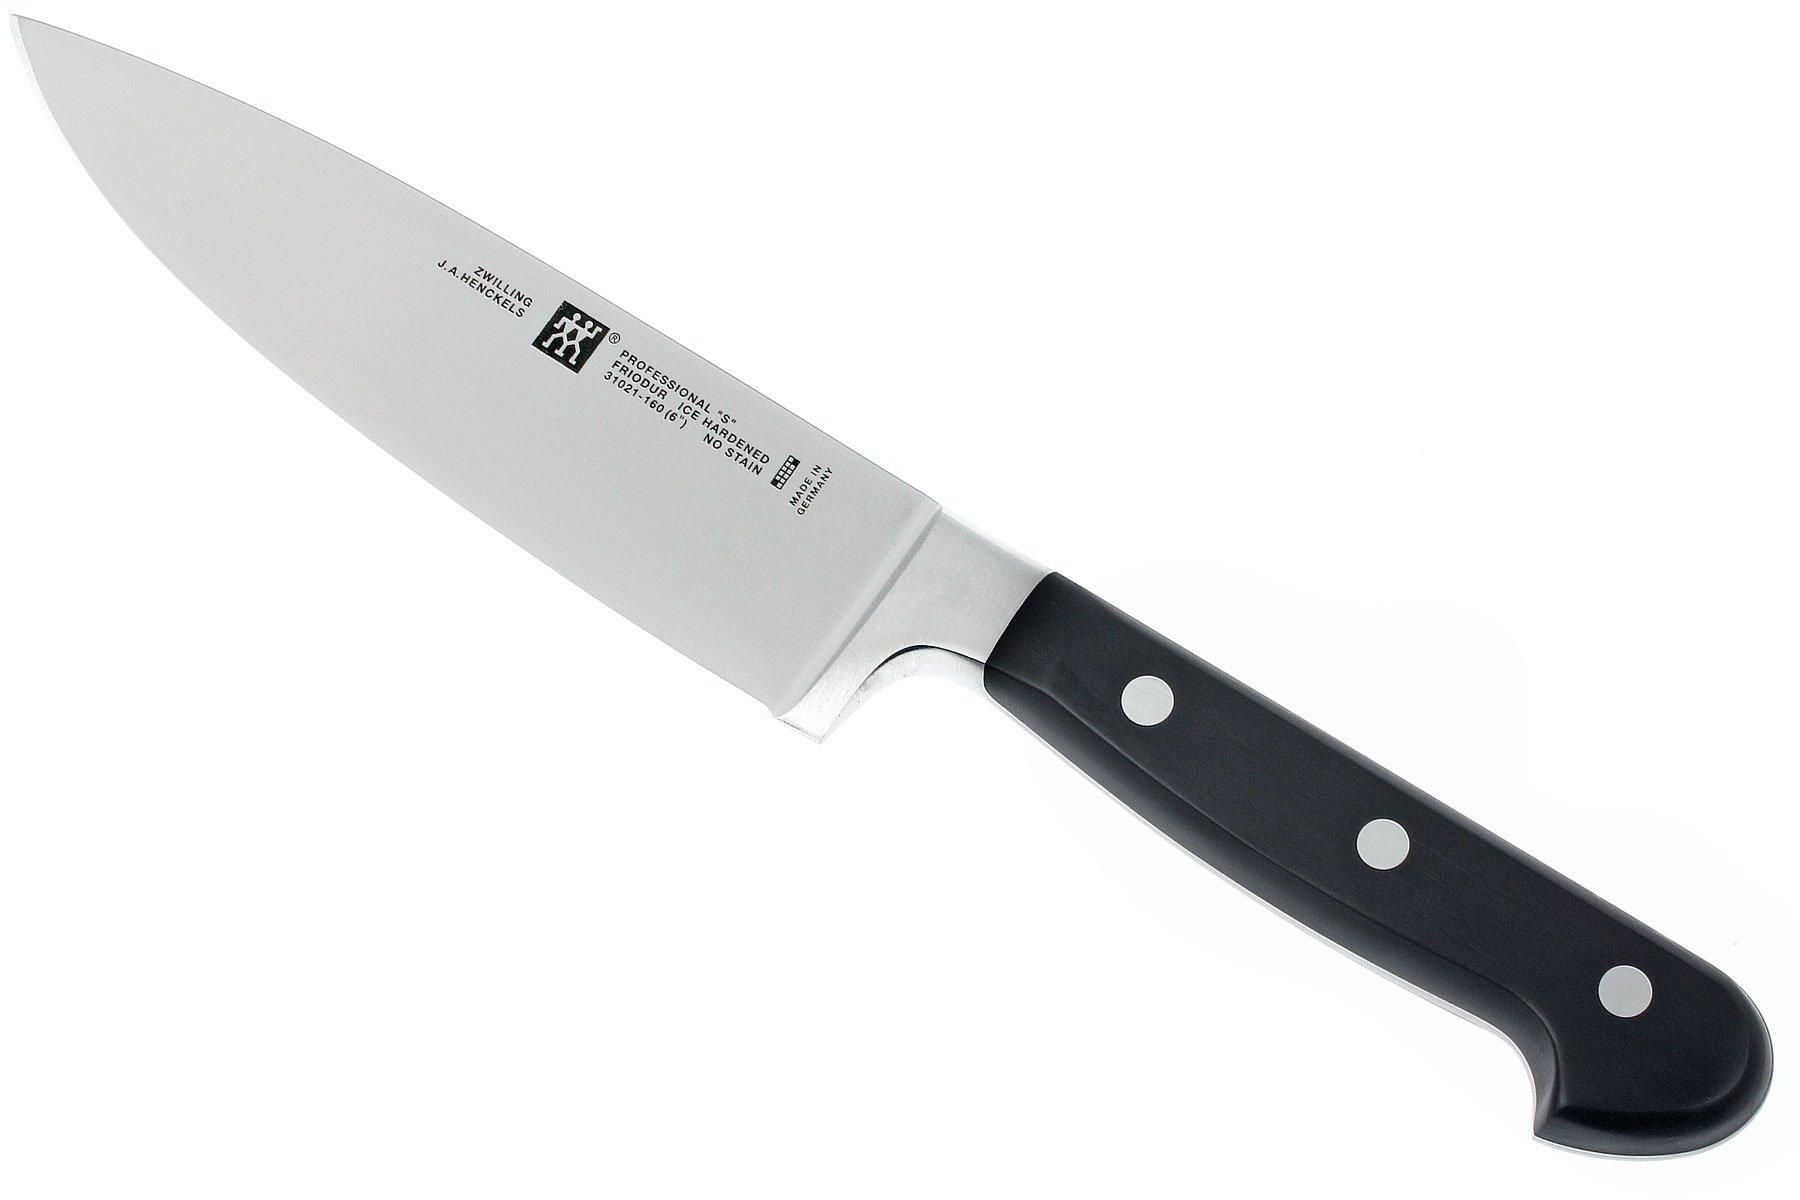 Zwilling J.A. Henckels Pro Chef's Knife